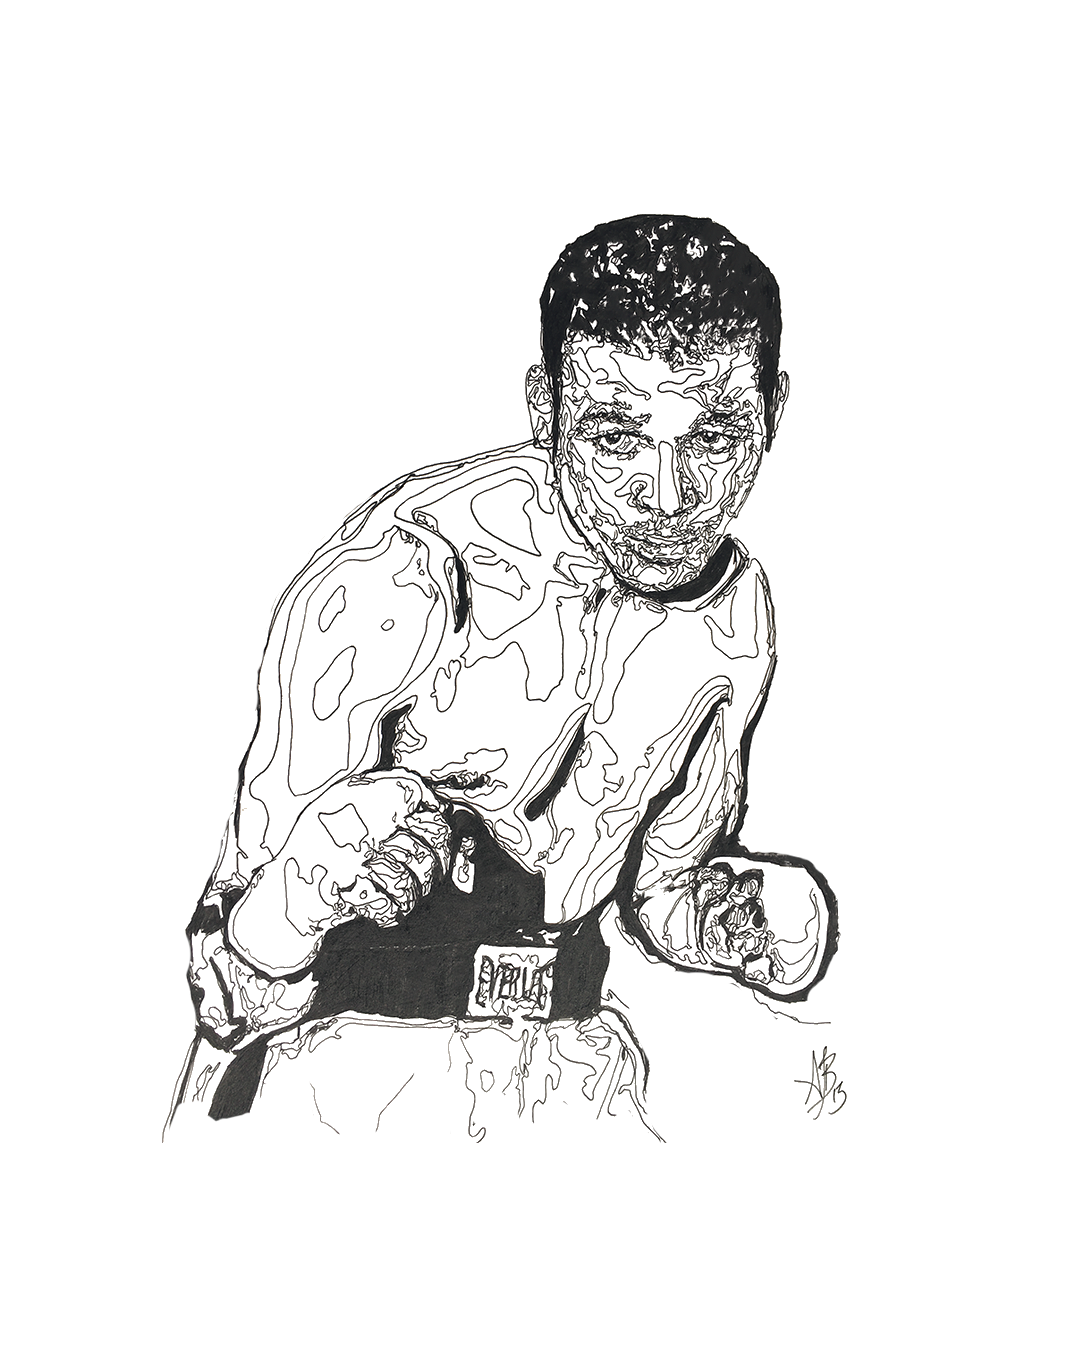 pen and ink visiography line drawing of boxing legend, Sugar Ray Robinson